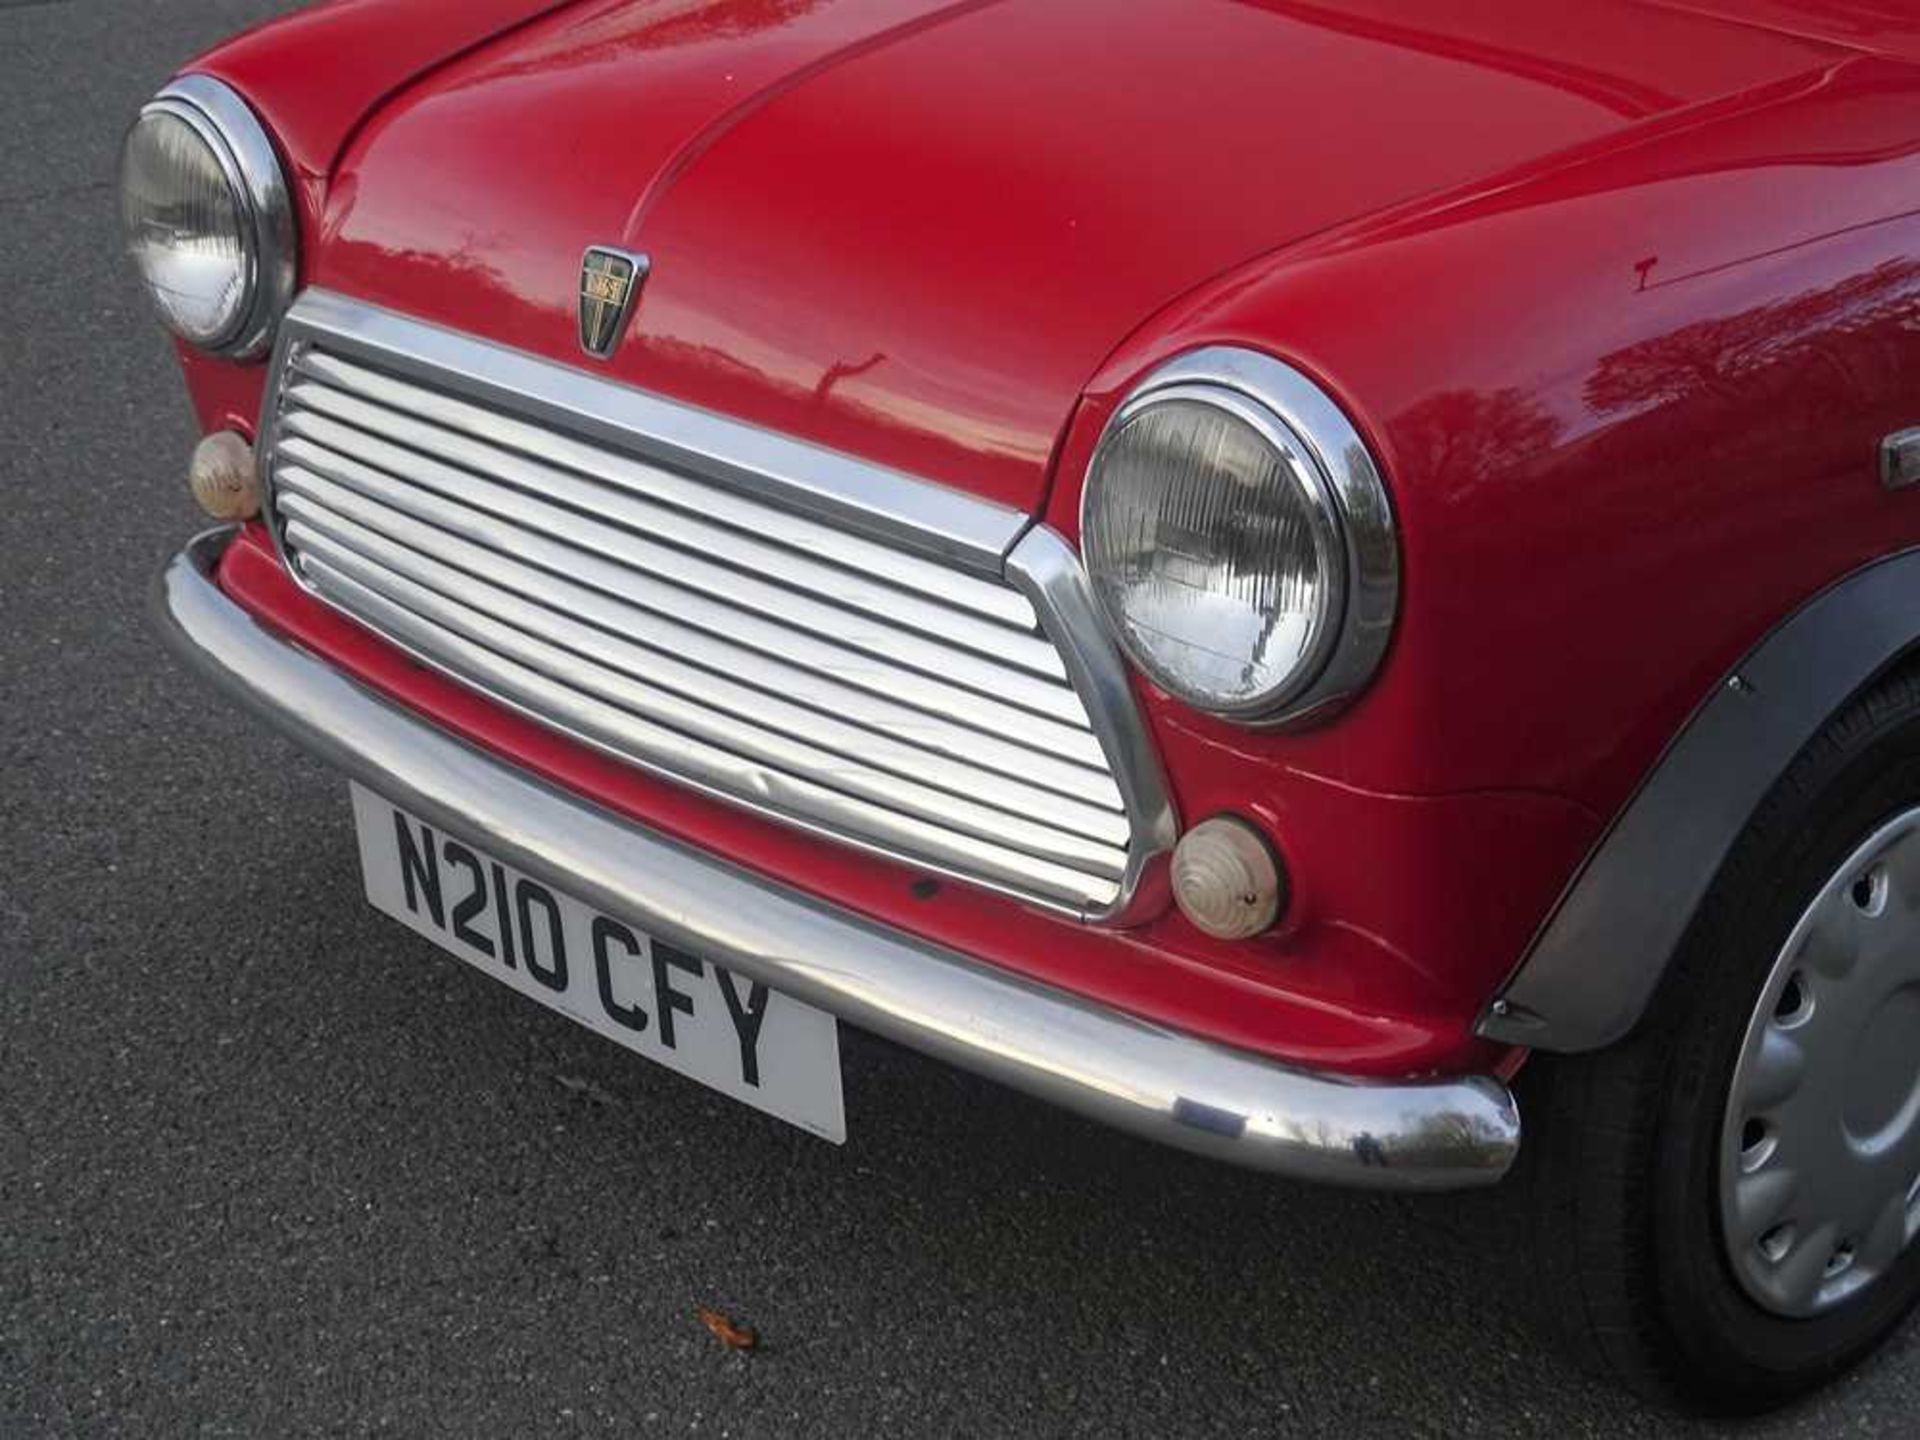 1995 Rover Mini Sprite Only c.22,500 miles from new - Image 21 of 52